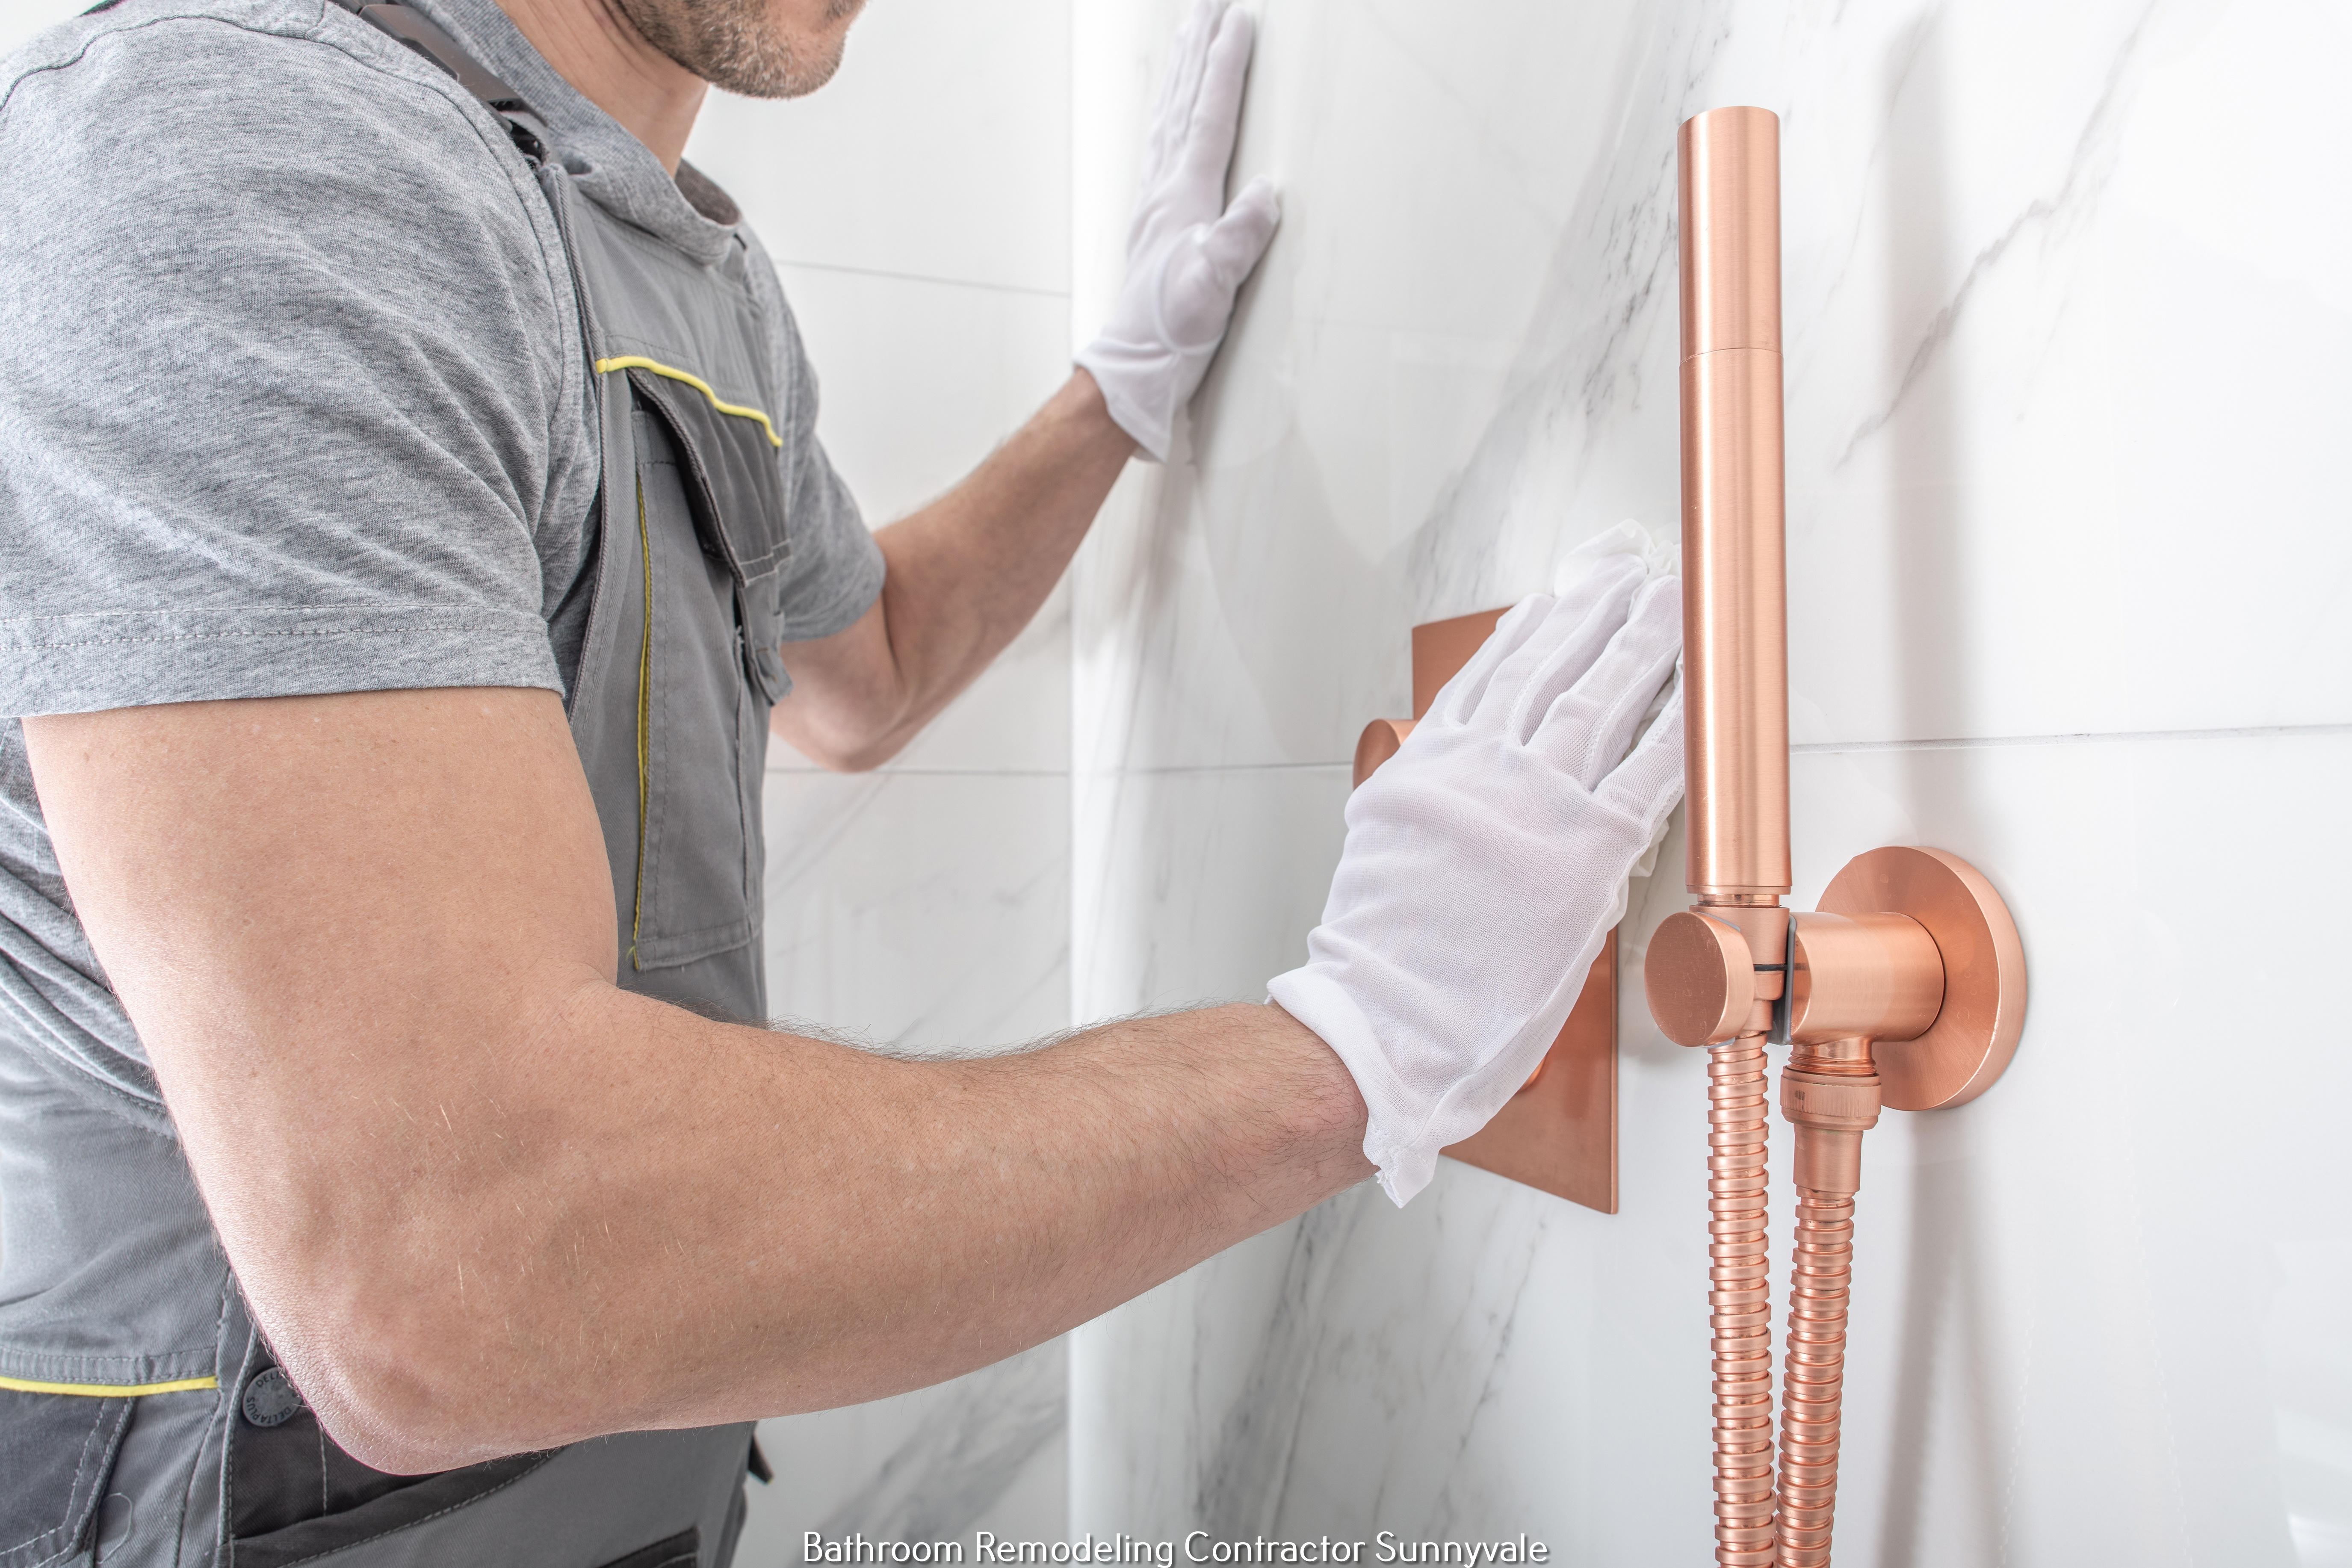 Atlantis Remodeling Shares Tips for a Successful Bathroom Remodeling